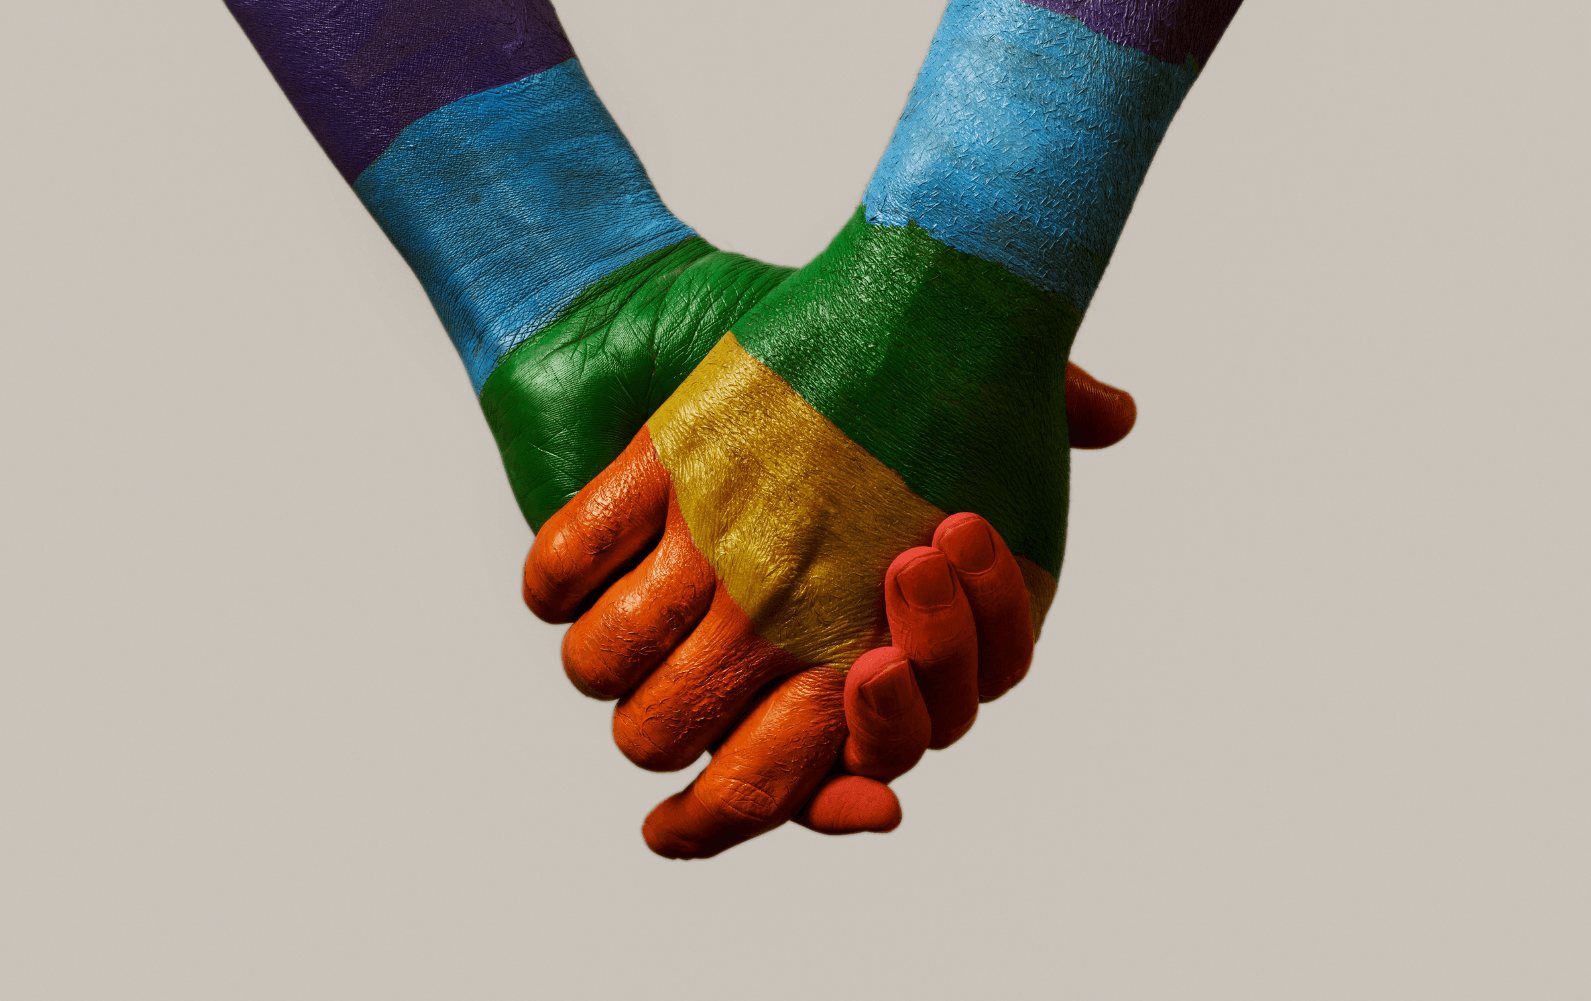 Episode 41 - The Search for Acceptance: LGBTQ Jews and Mental Health